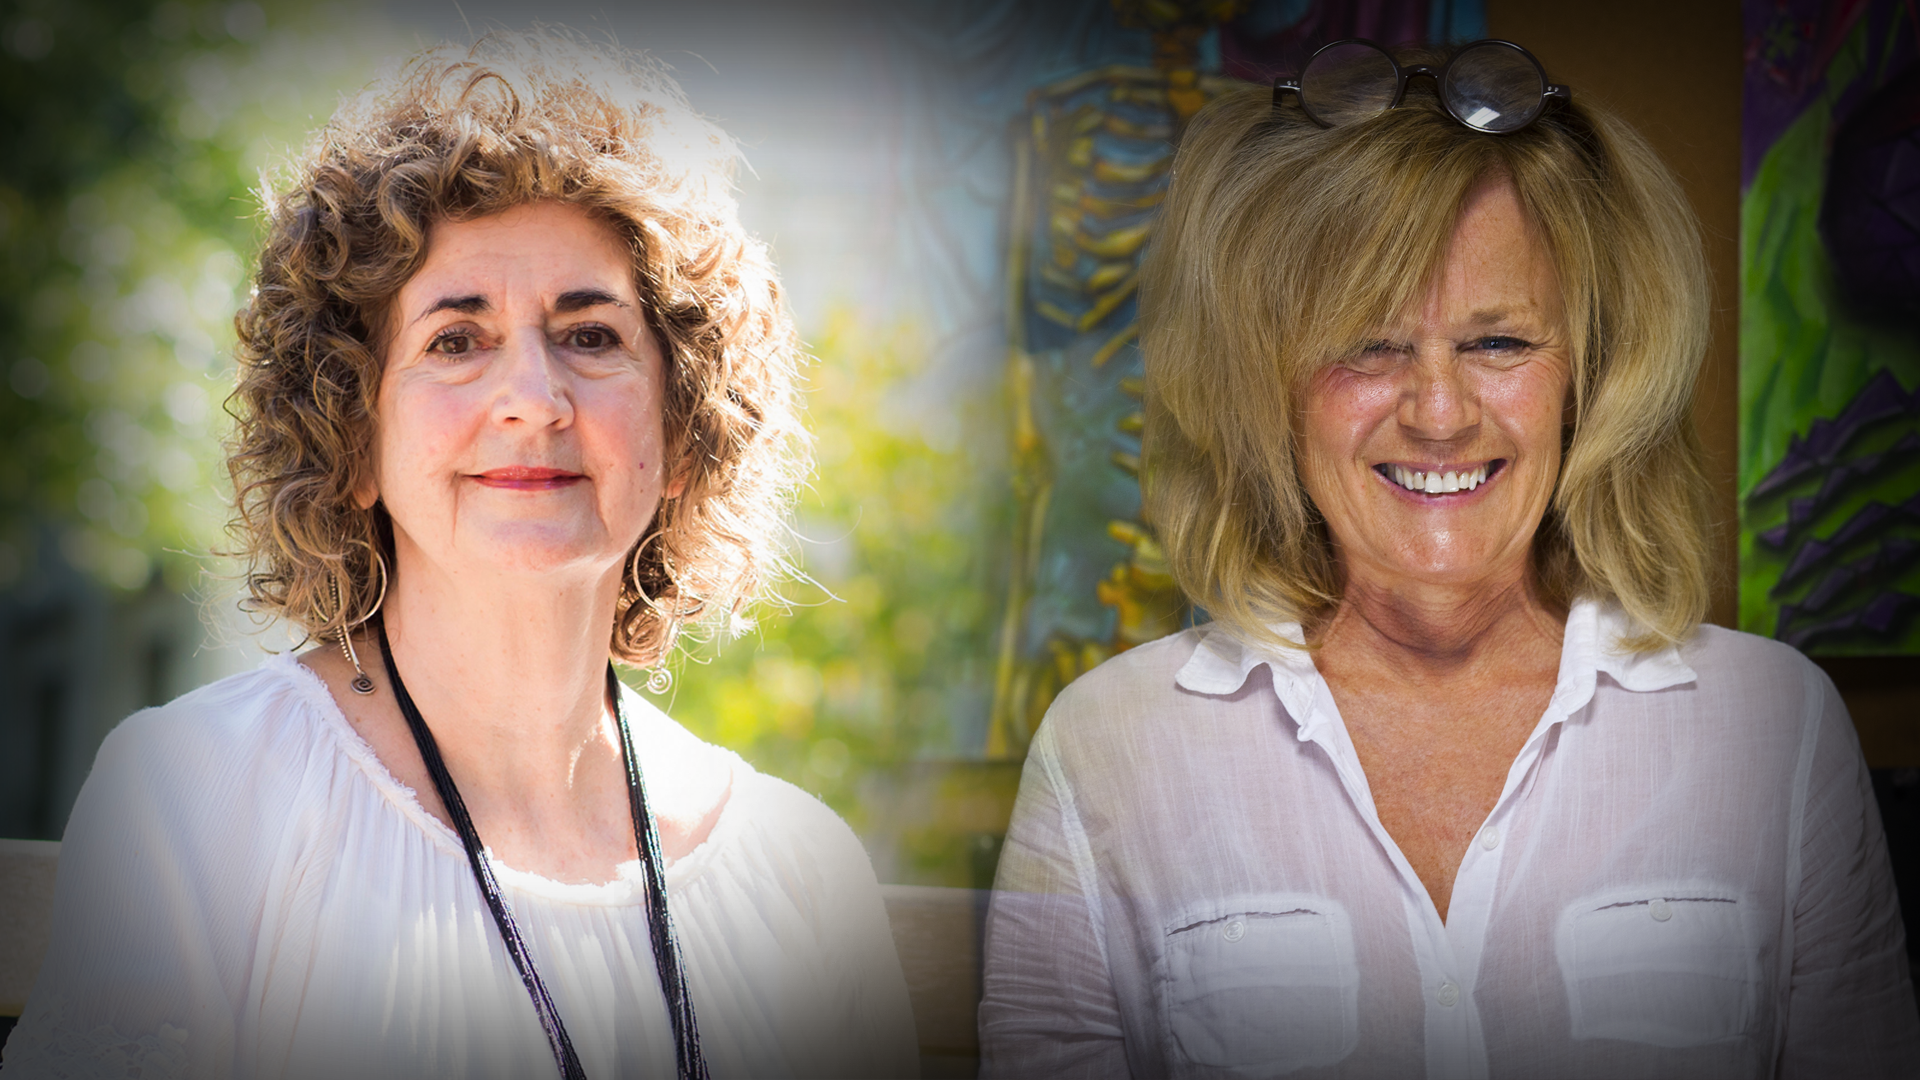 Patti Owen-Smith and Camille Cottrell retired after the spring 2019-2020 academic year